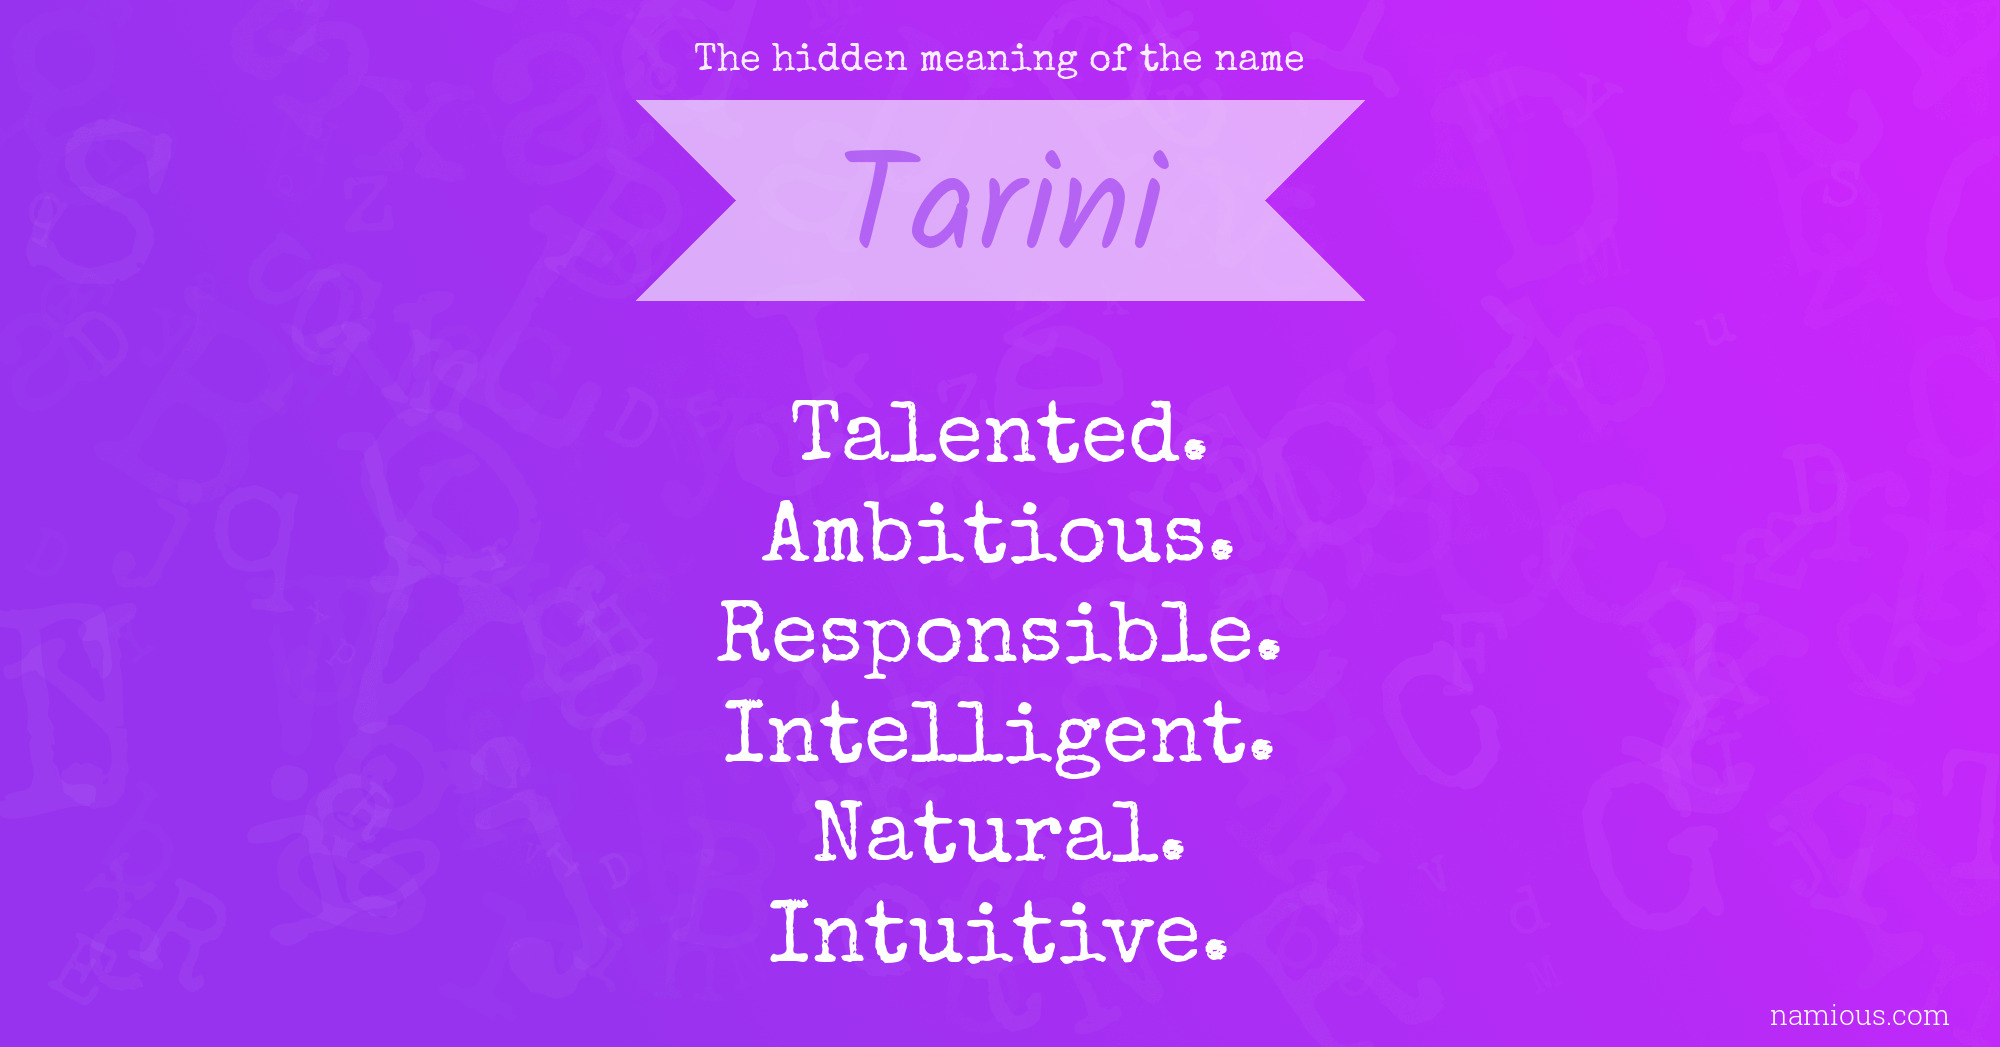 The hidden meaning of the name Tarini